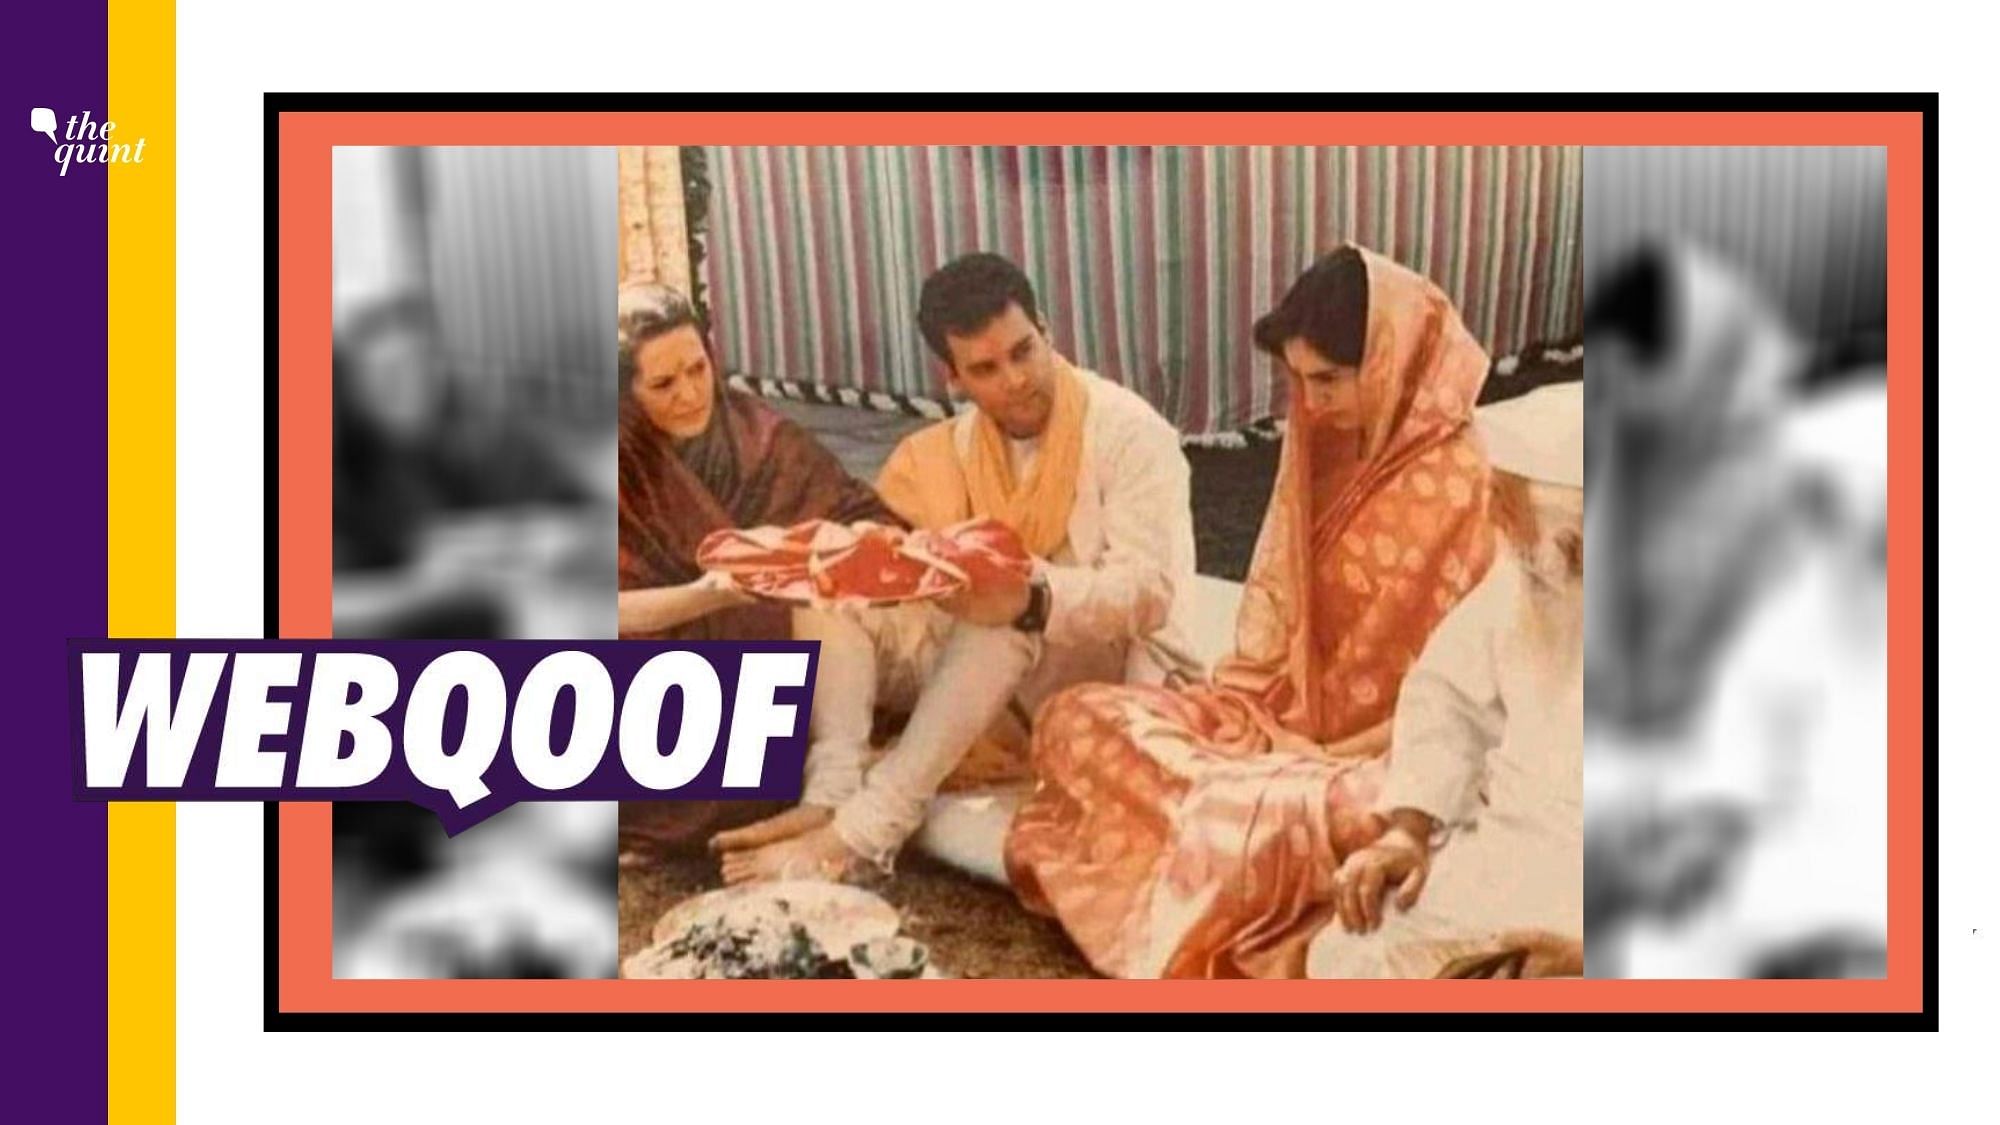 An image of Priyanka Gandhi from her wedding day is being shared on social media with a false claim.